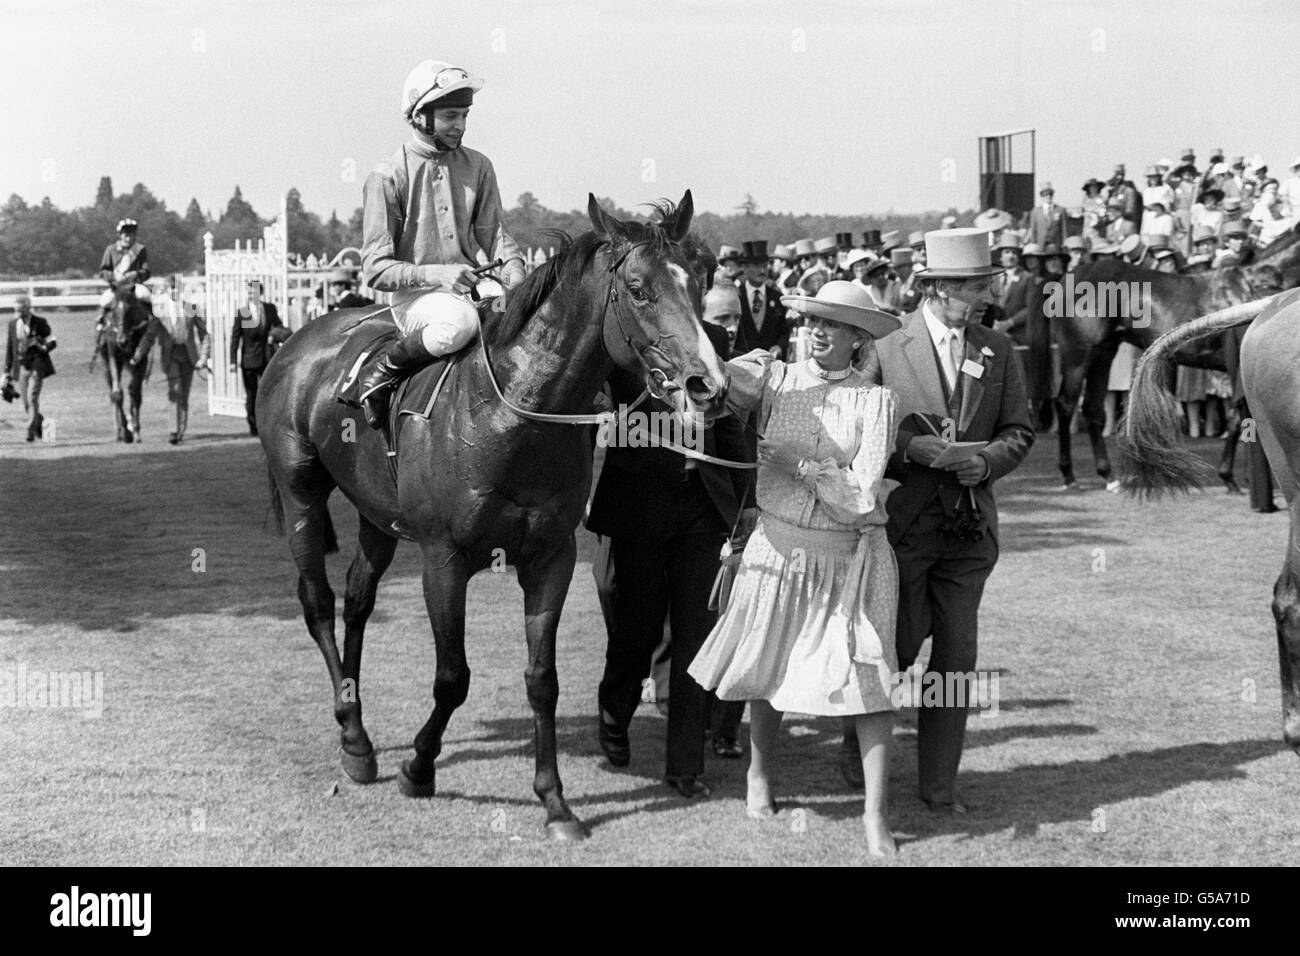 'Gildoran', with Steve Cauthen up, pictured with Susan Sangster, wife of the owner, after winning the Ascot Gold Cup with odds of 10-1. The Barry Hills trained colt set a new course record of 4 minutes 10.81 seconds. Stock Photo